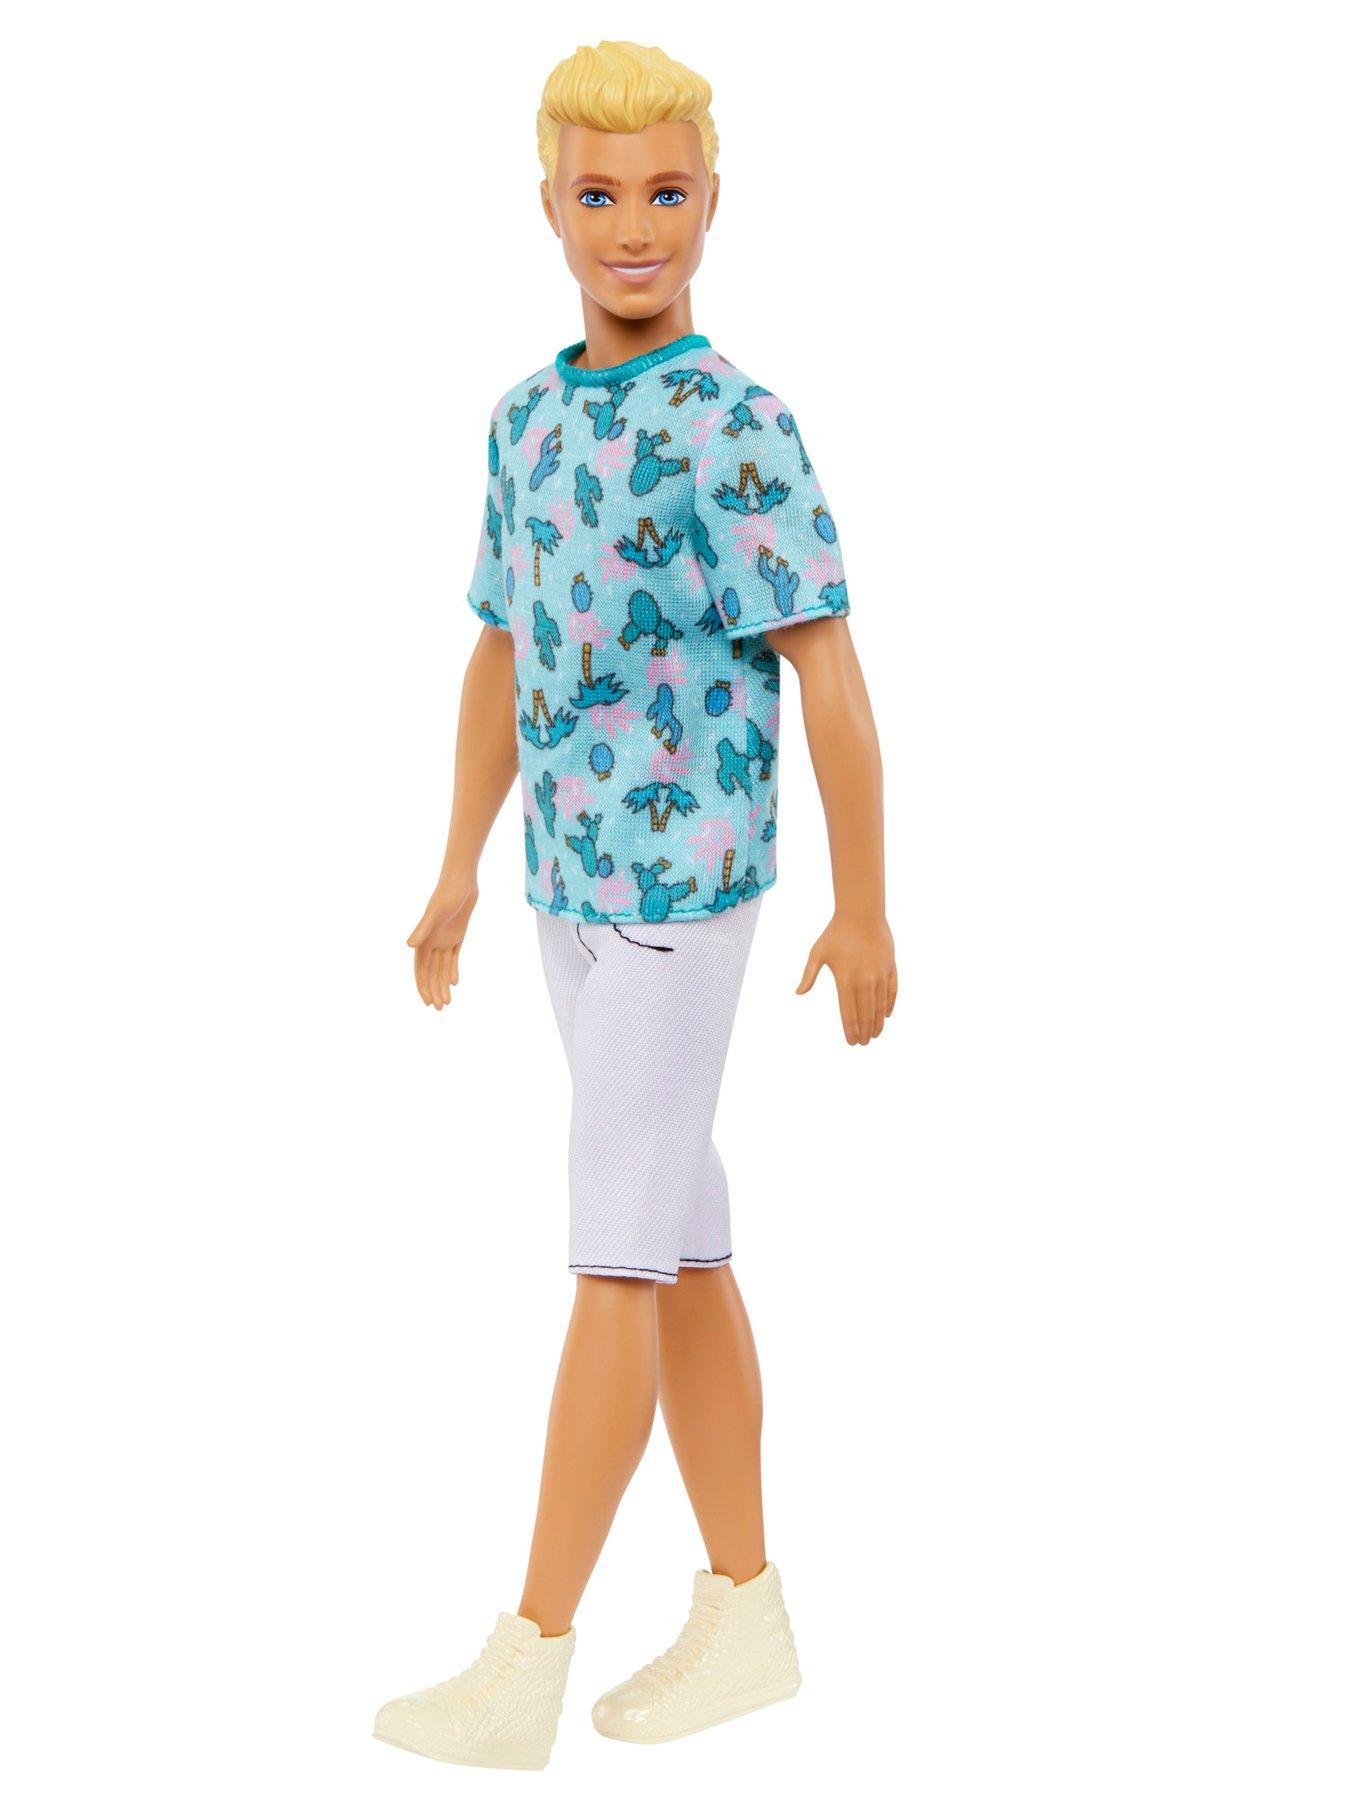 Barbie Ken Fashionista Doll - #211 with Blonde Hair and Cactus Tee ...